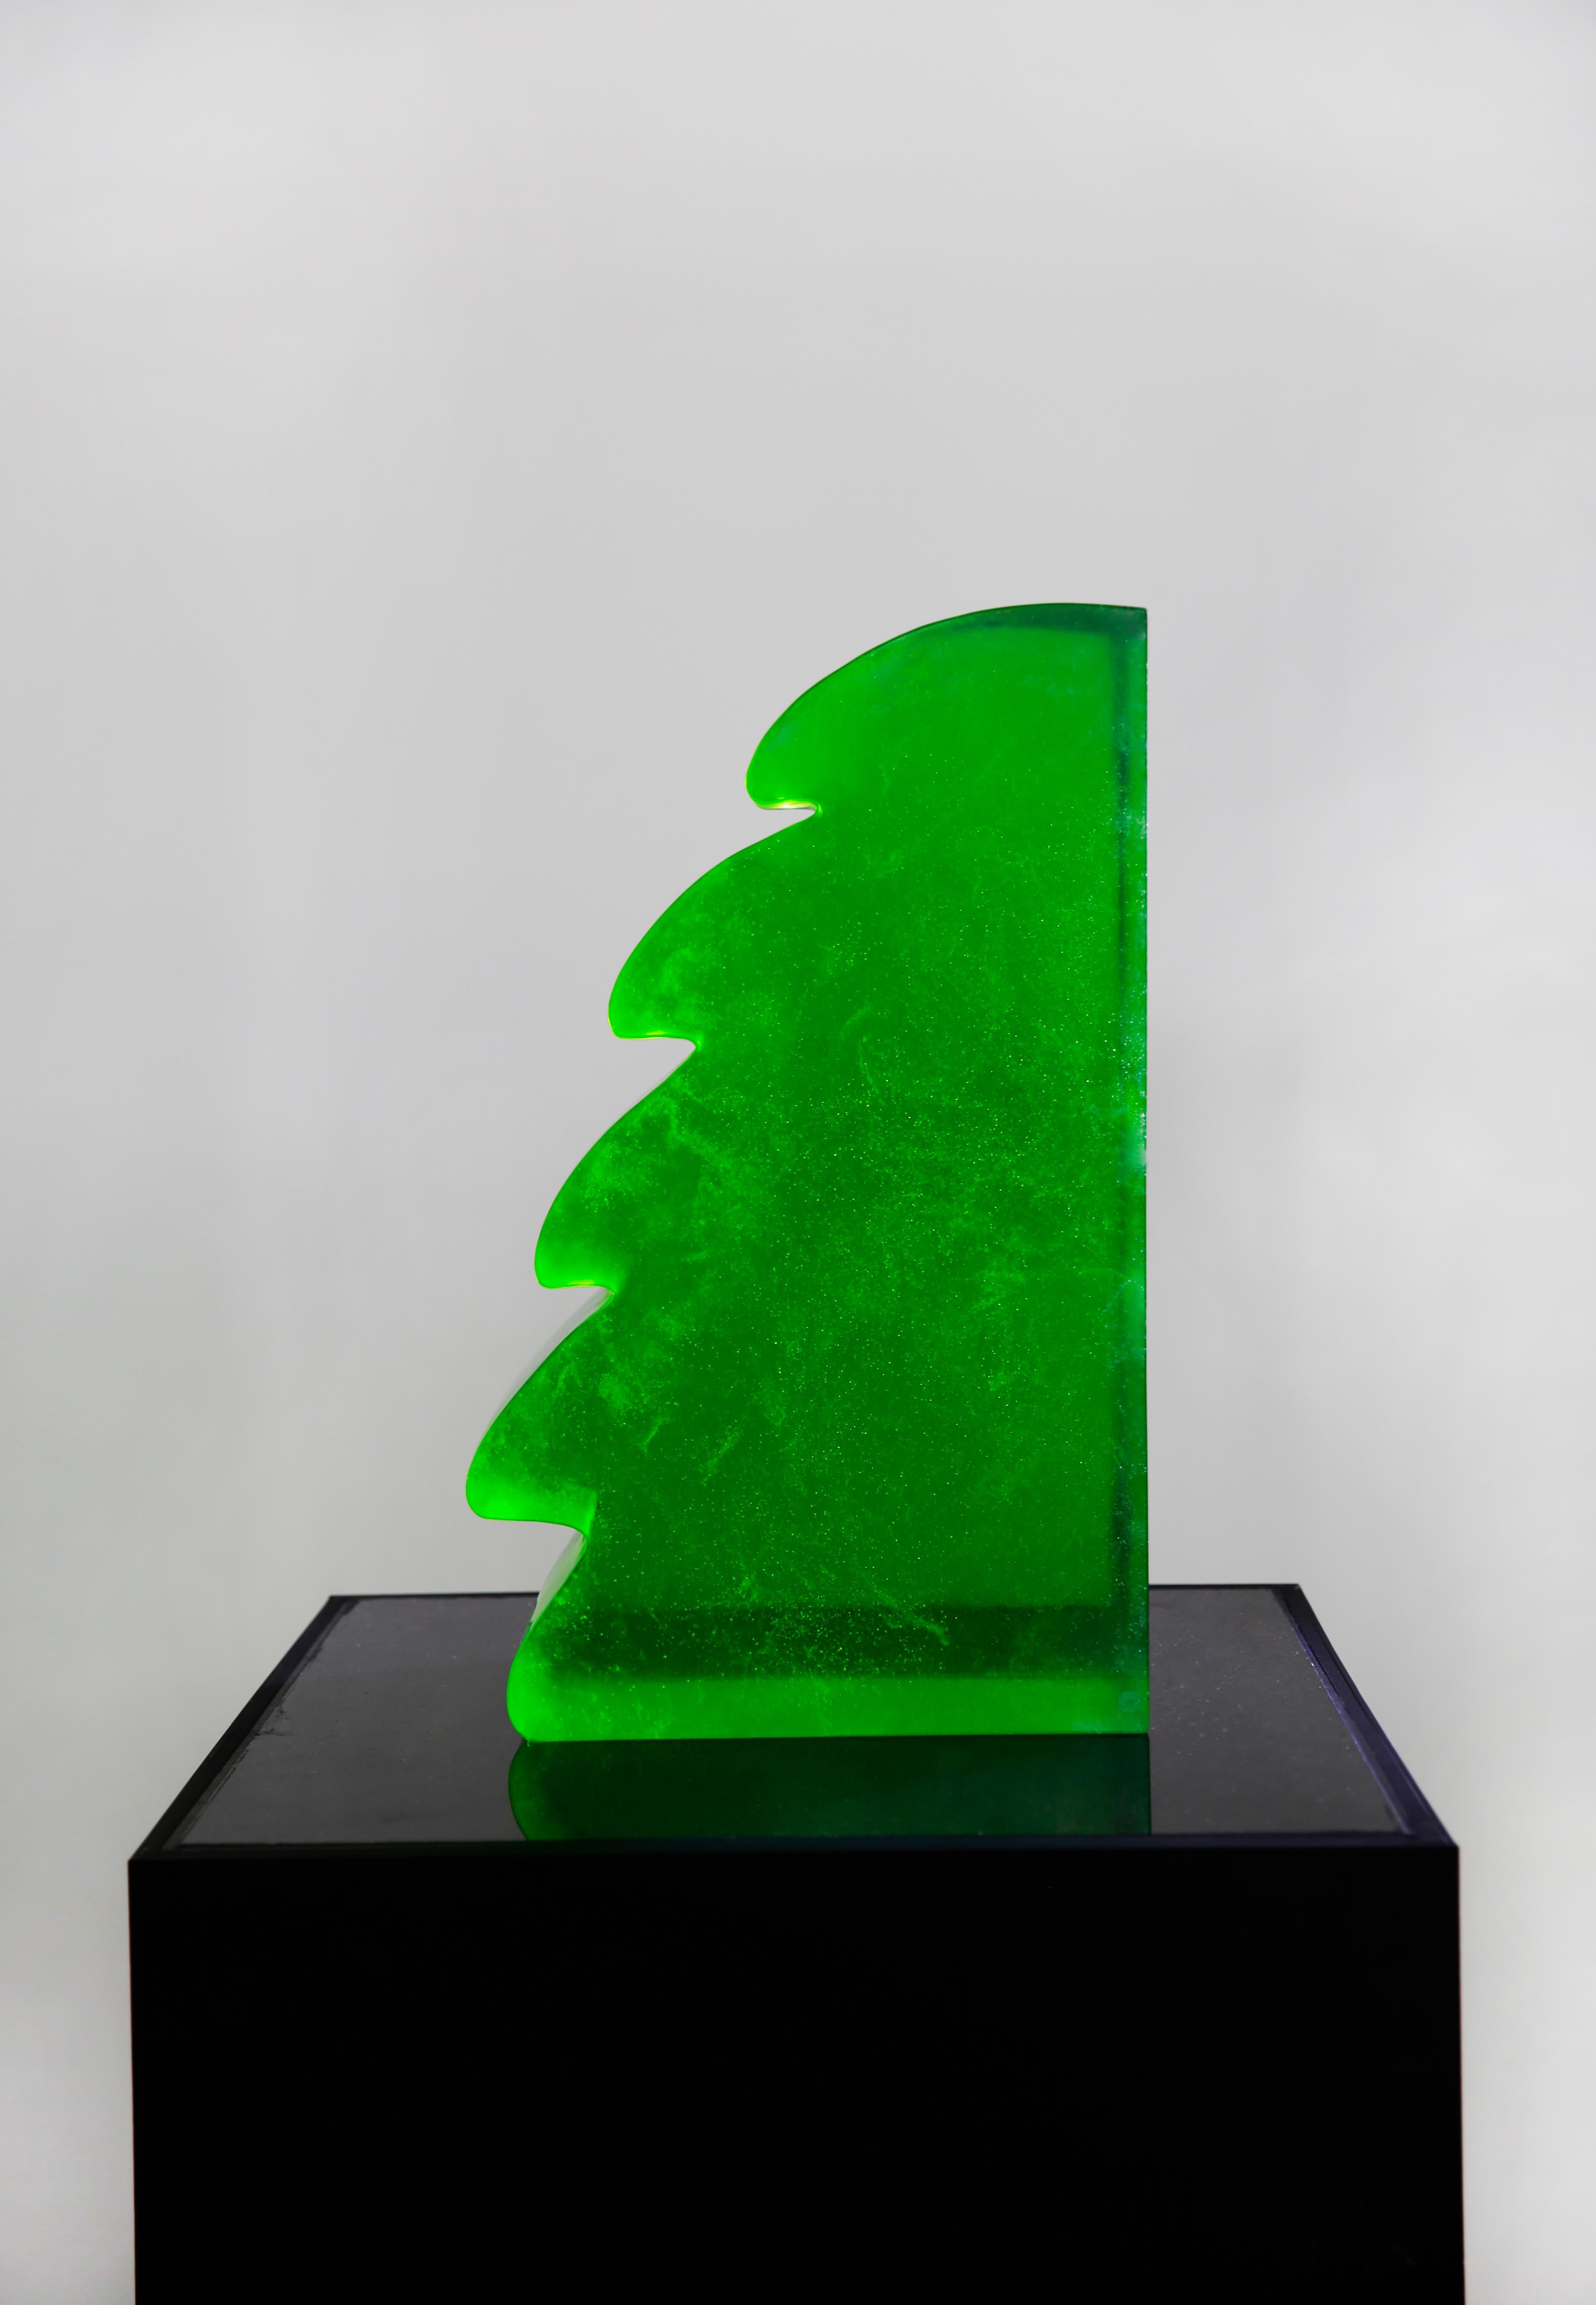 The sculpture is signed and numbered. Edition 1/1


About Series Four Seasons: 
I created this Spring, Summer, Autumn and Winter based on the abstract deformation of leaf sections. For the collection of Summer, I chose the glass material that